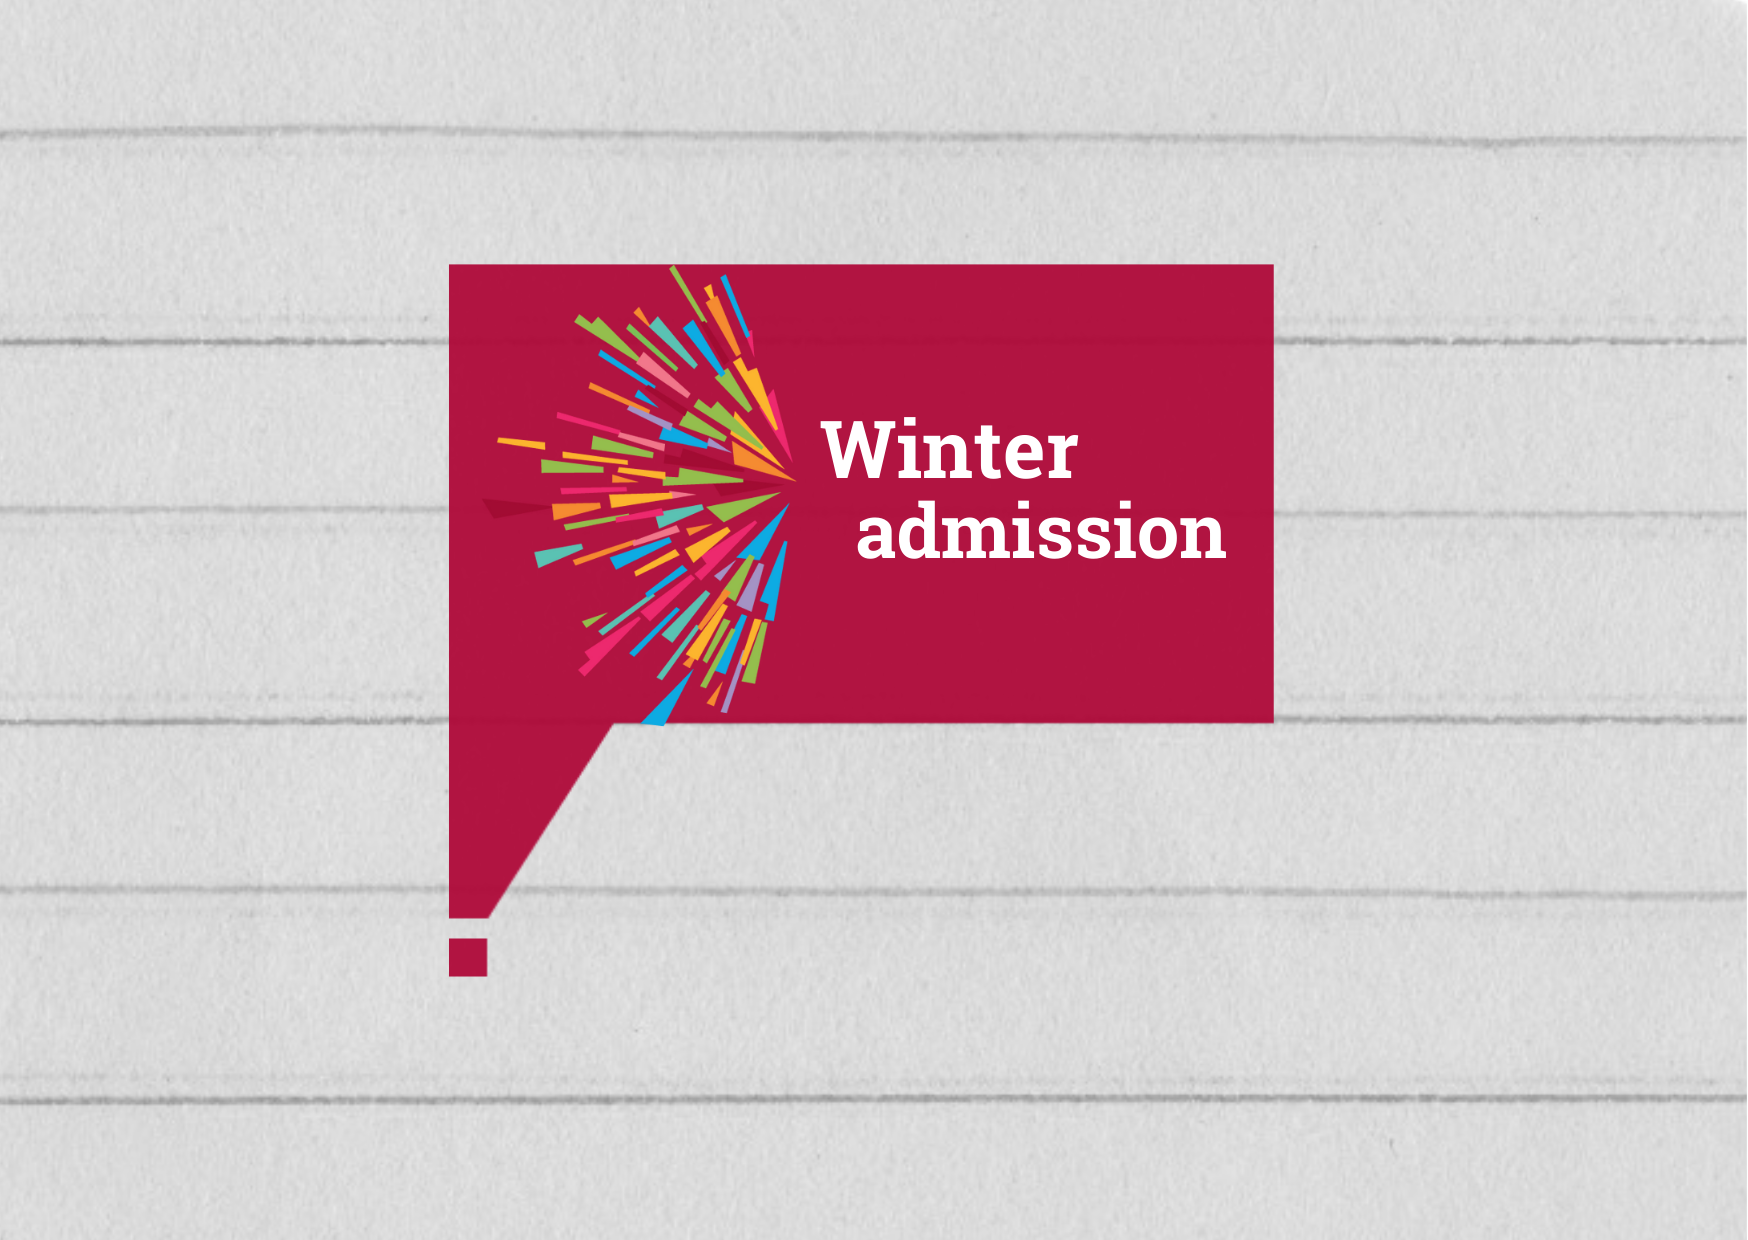 The admission process for the Winter 2022 intake at Latvian higher education institutions is ongoing